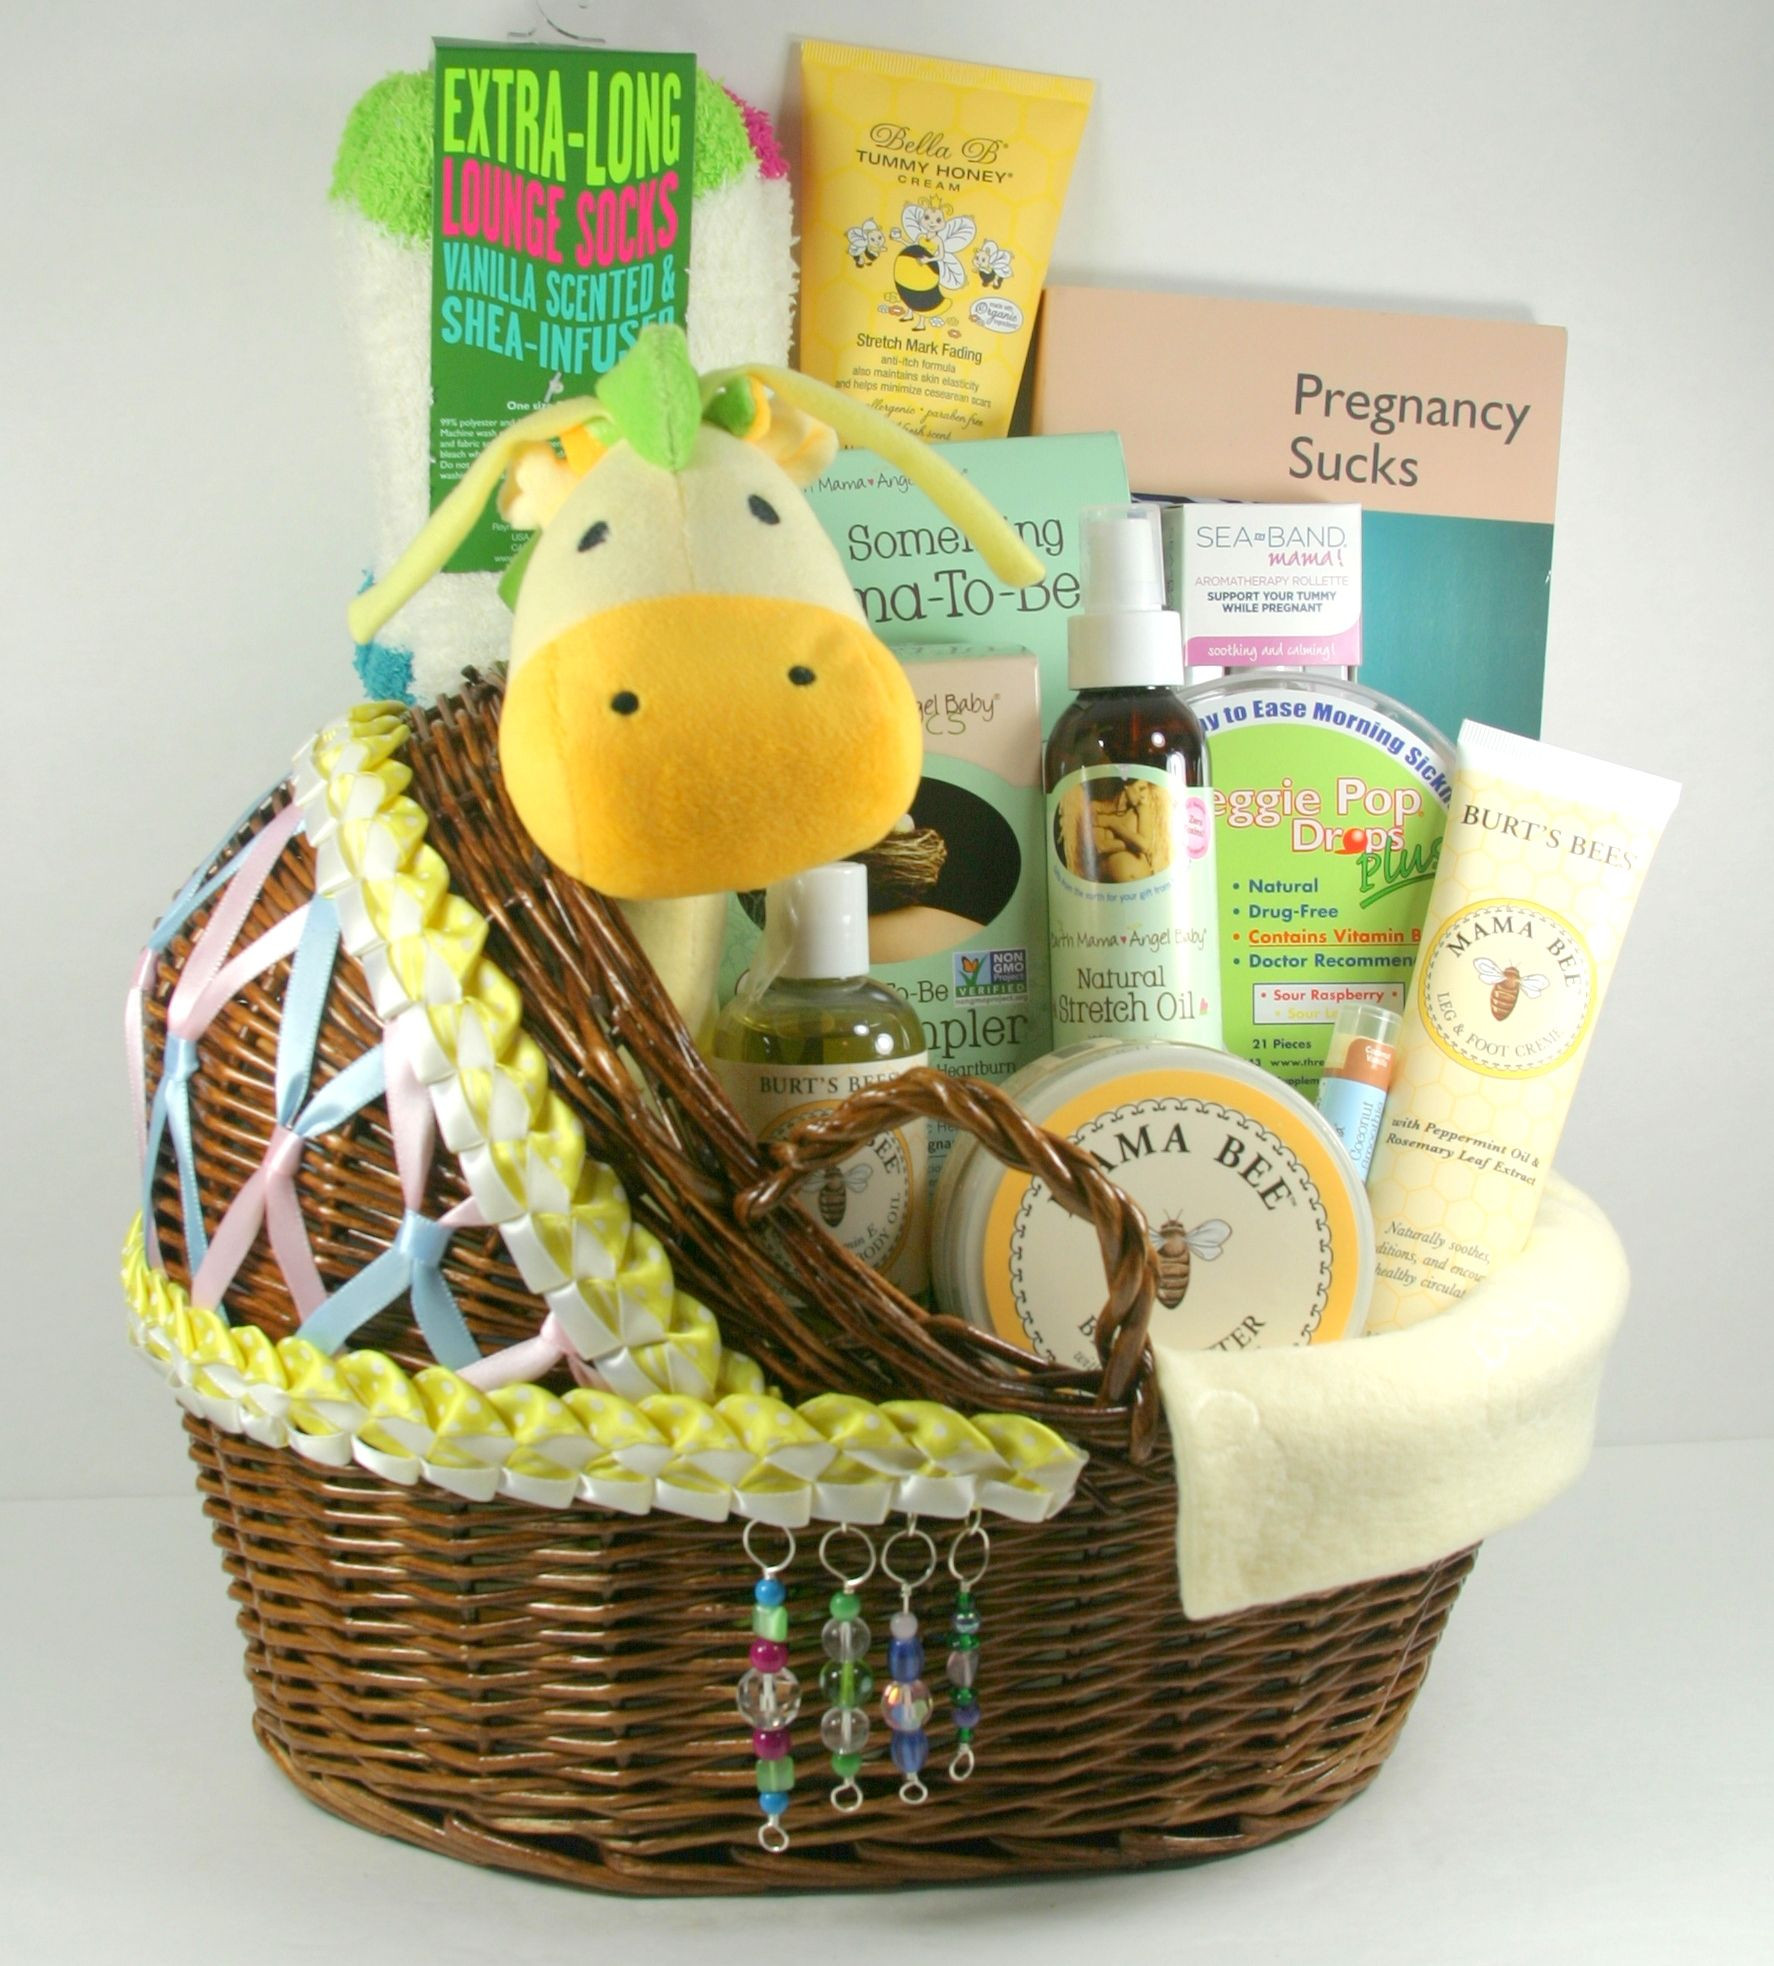 Gift Basket Ideas For Expecting Mom
 Pin on New Mom Care Packages